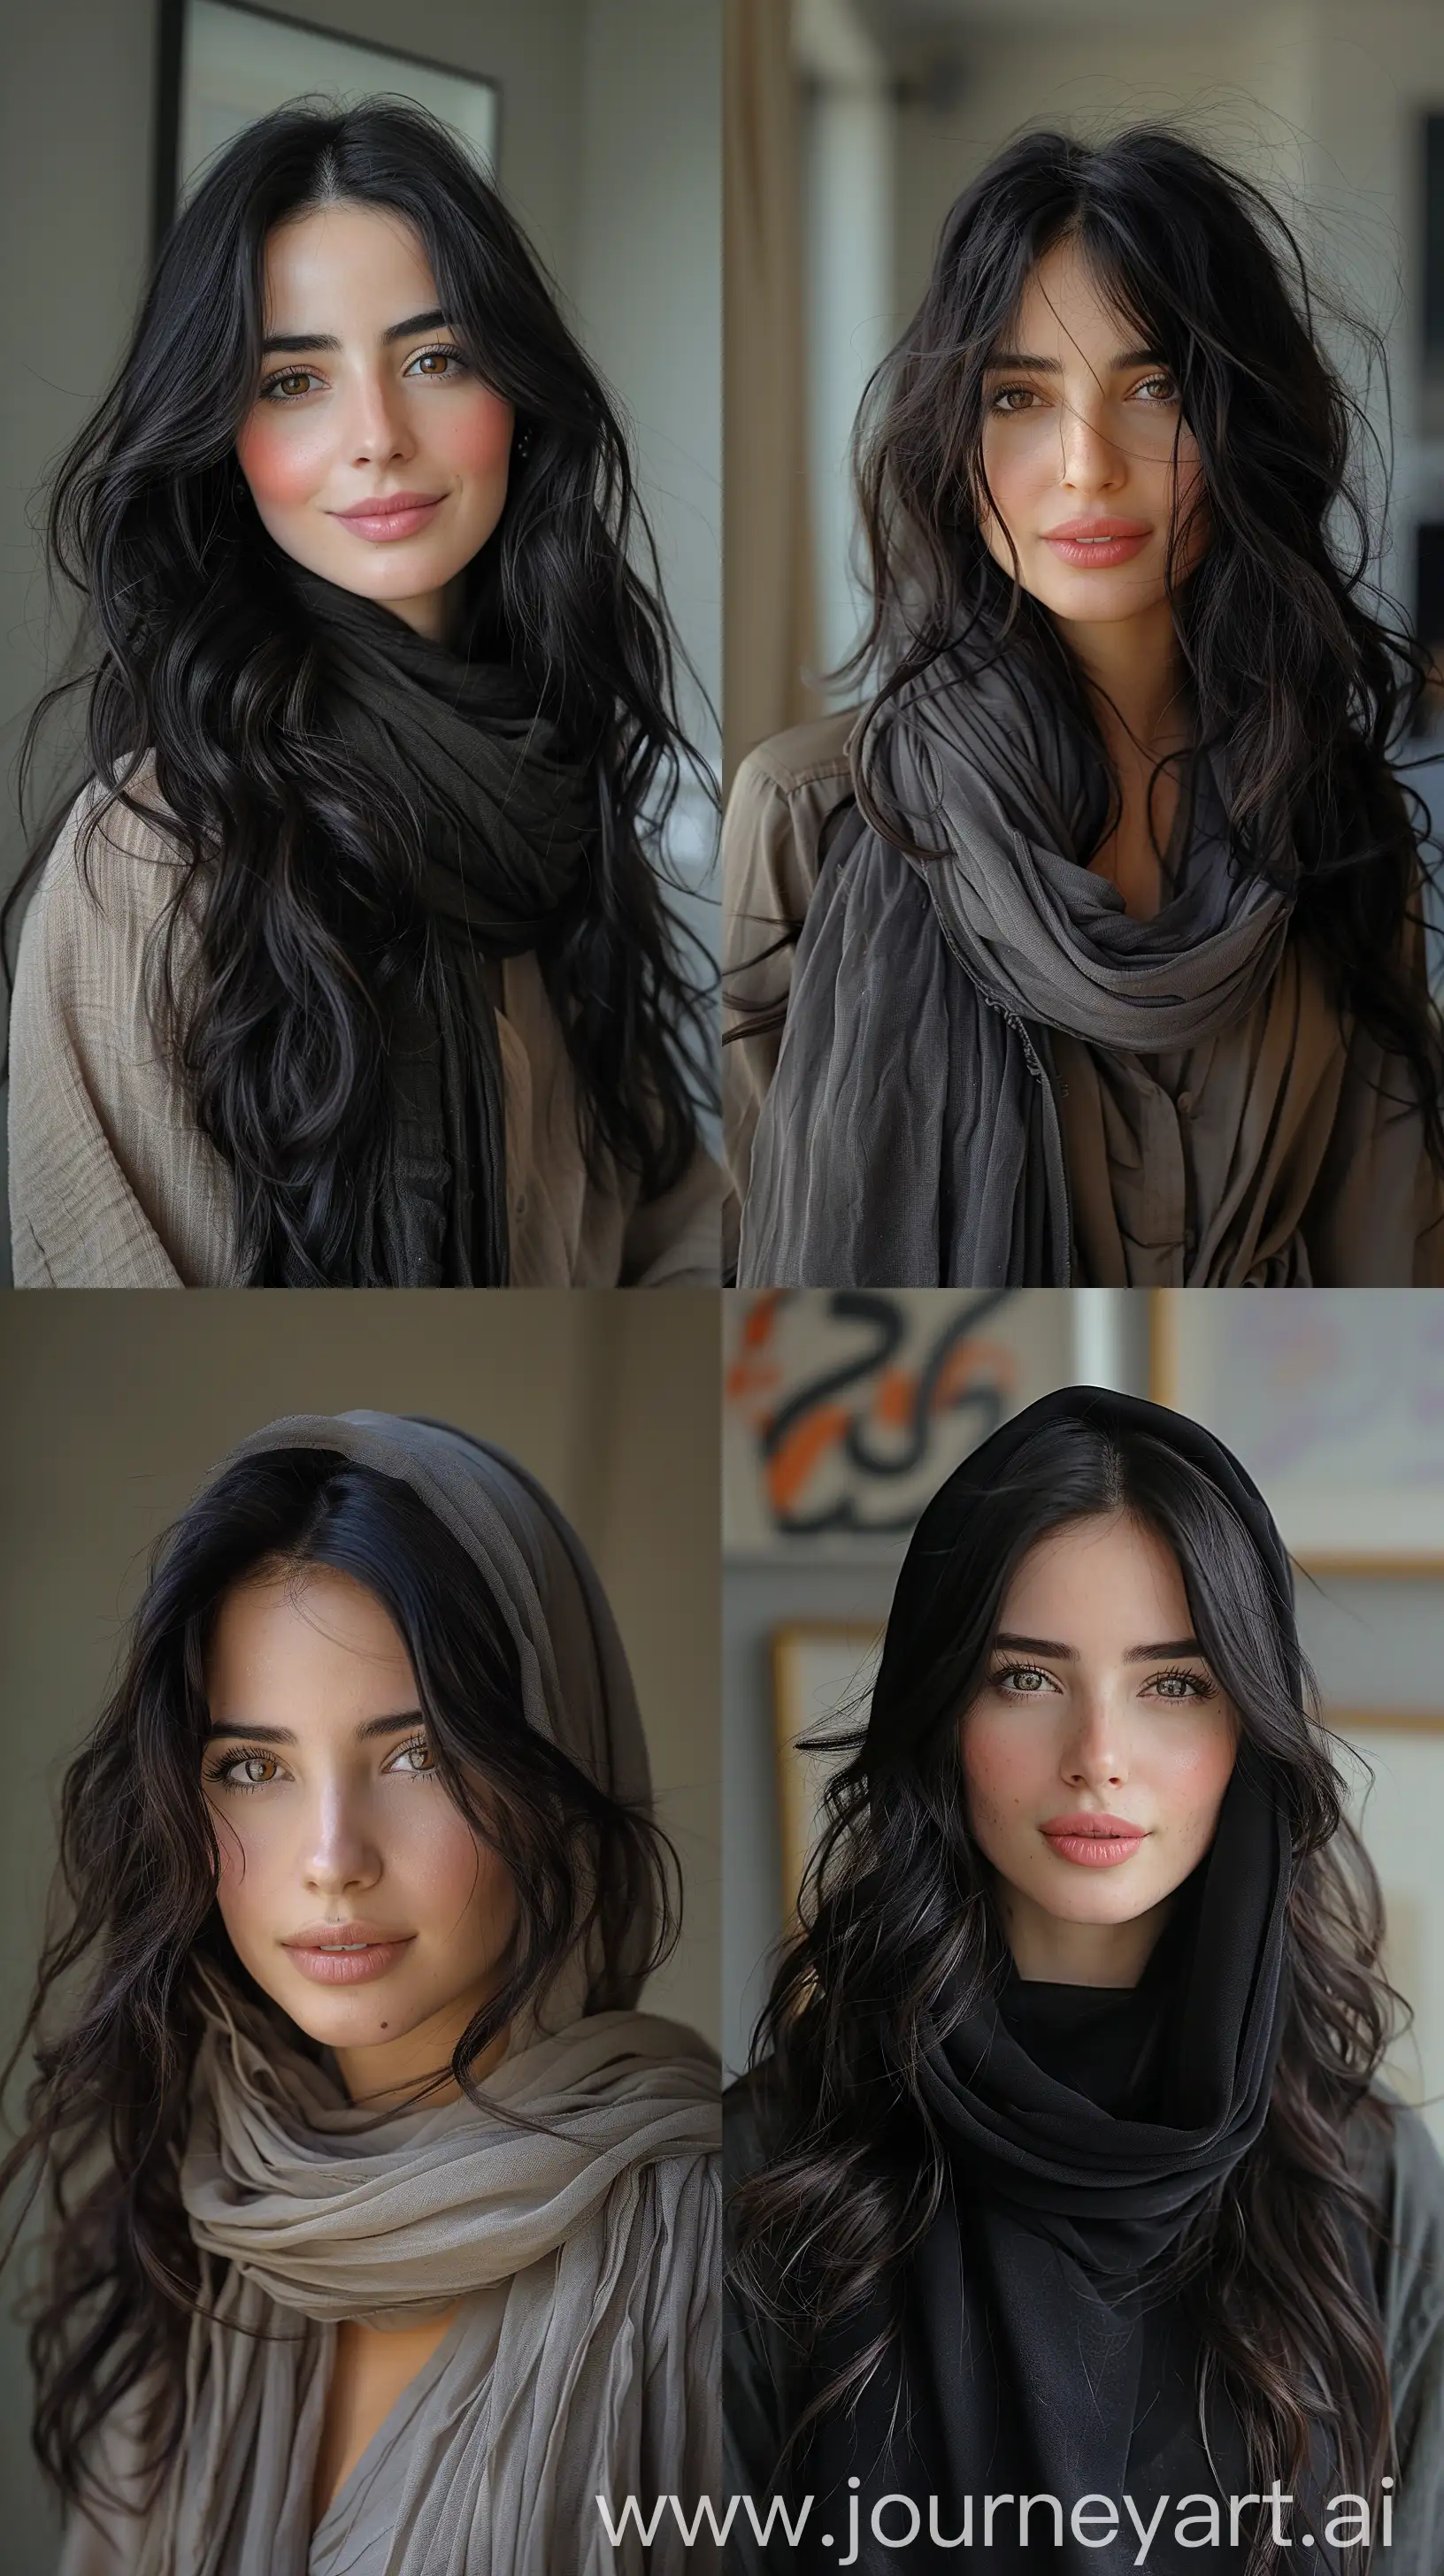 a realistic photo of a [iranian 21 year old woman], with [long, wavy, dark hair], looks like [Dakota Johnson] and [Felicity Jones],with hijab,happy, in color, wearing clothes, light makeup, looking [innocent, cute, flushed], [light] skin --ar 9:16 --stylize 750 --v 6